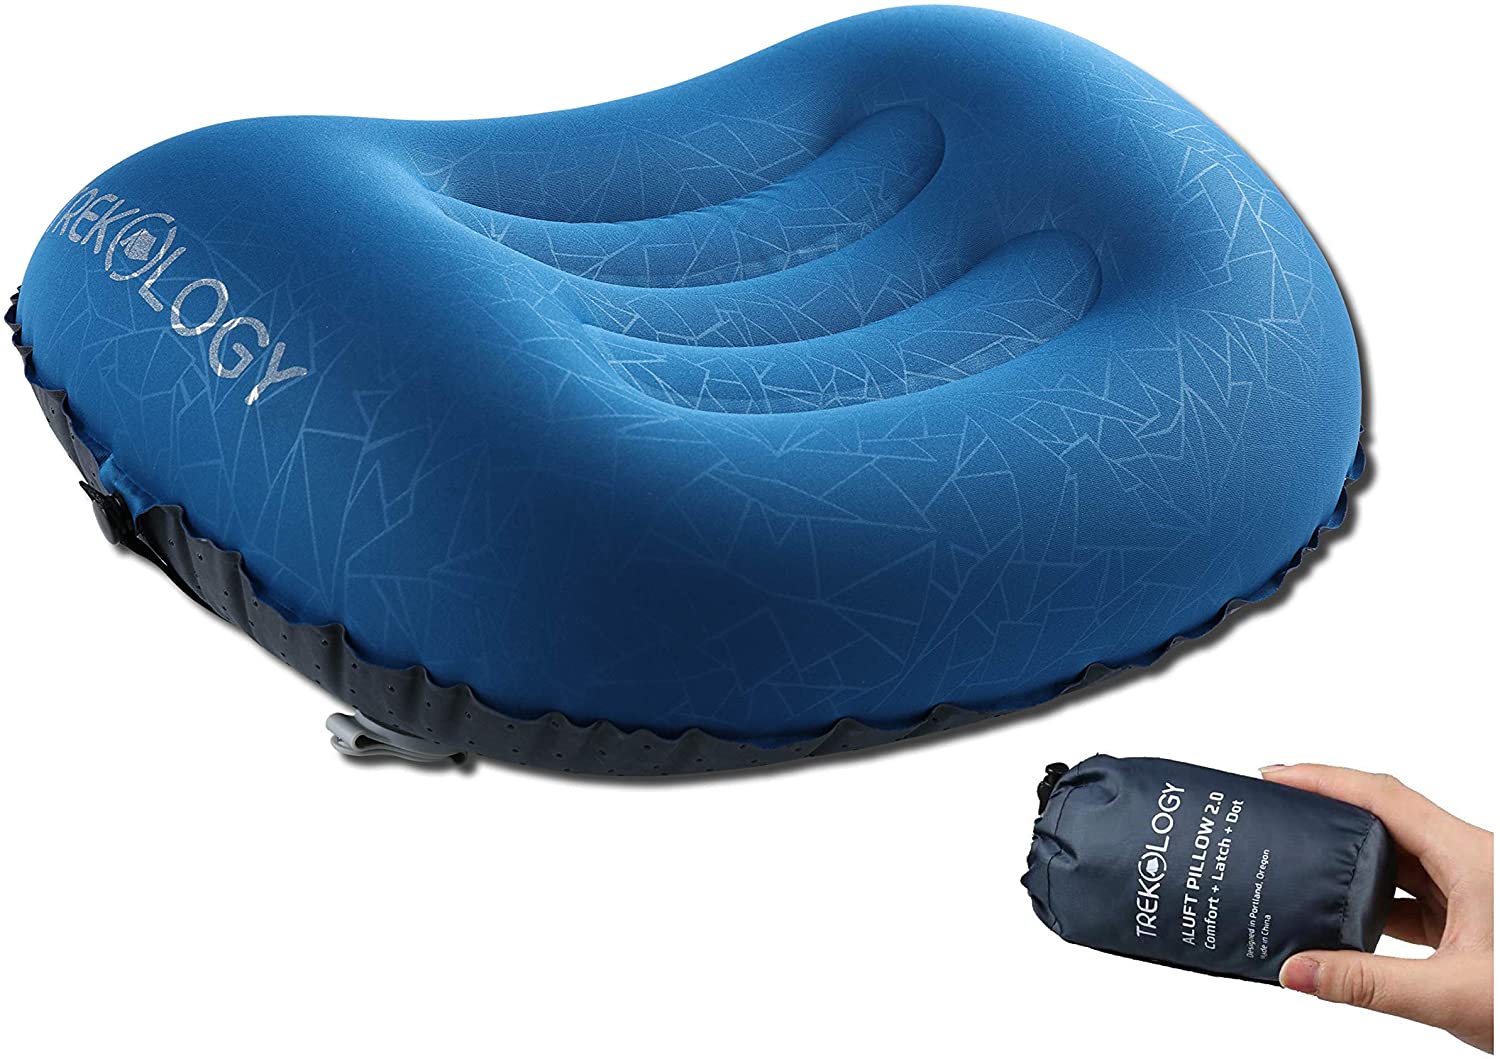 Portable Inflatable Flocked Air Pillow Neck and Lumbar Support Squared Inflatable Pillow Cushion for Rest Bed Travel Cushion Camping Blue